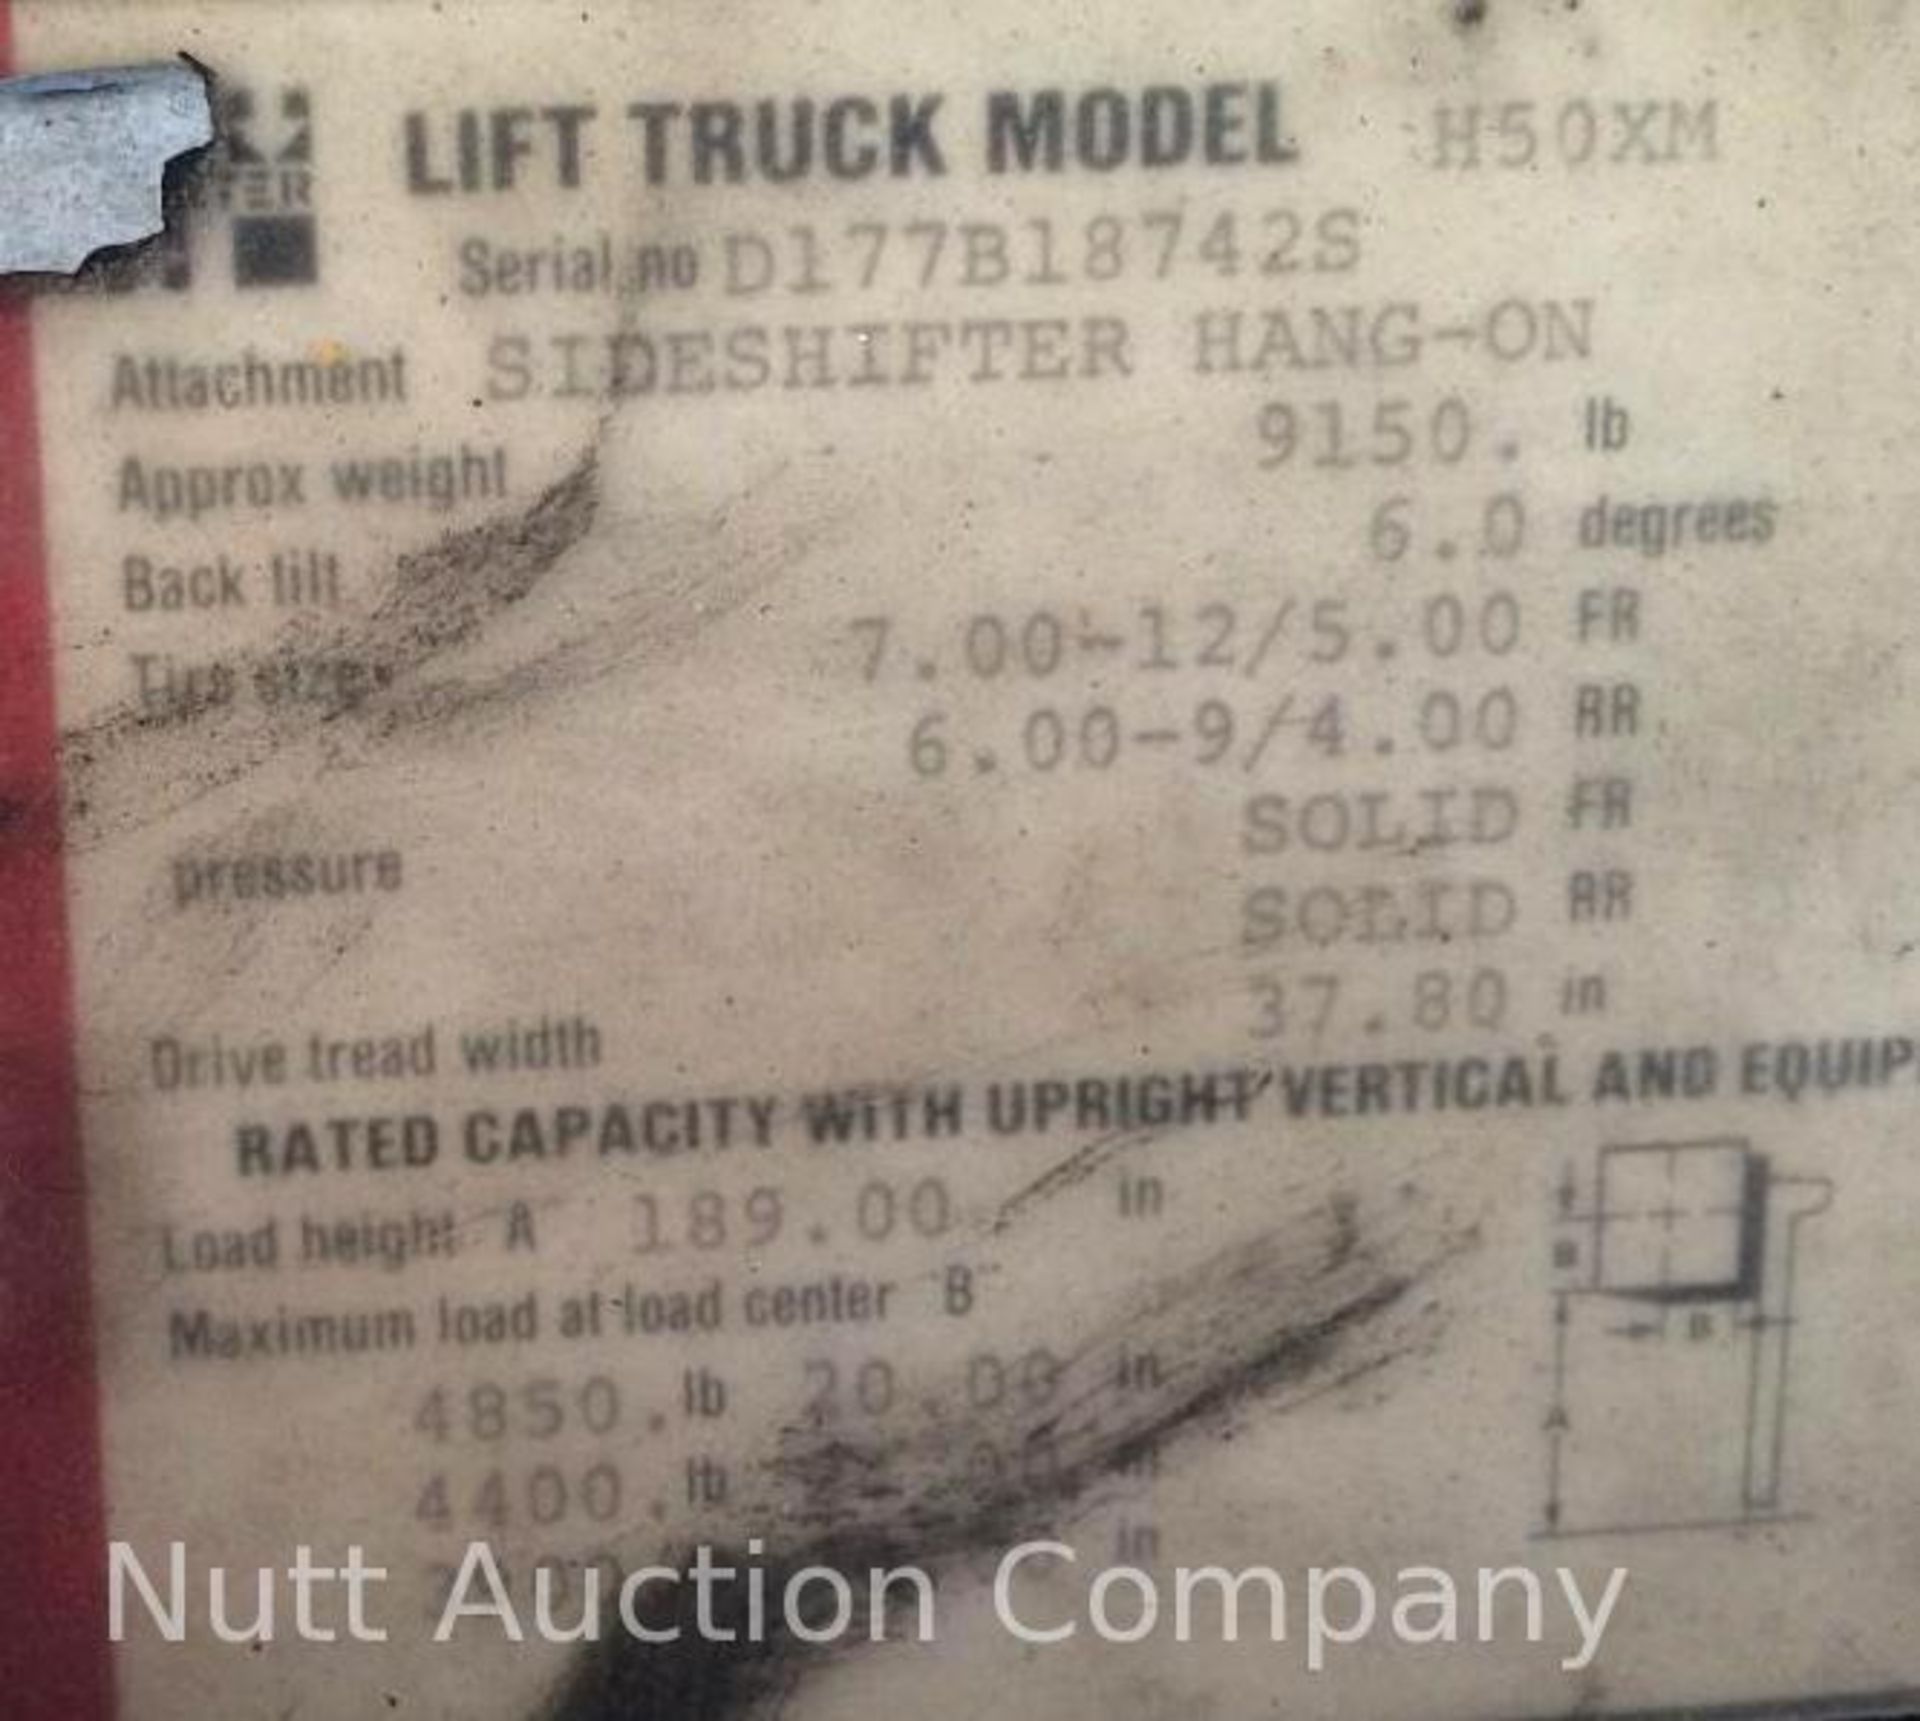 Hyster X50HM Forklift Serial: D177B18742S, LPG - Image 12 of 12